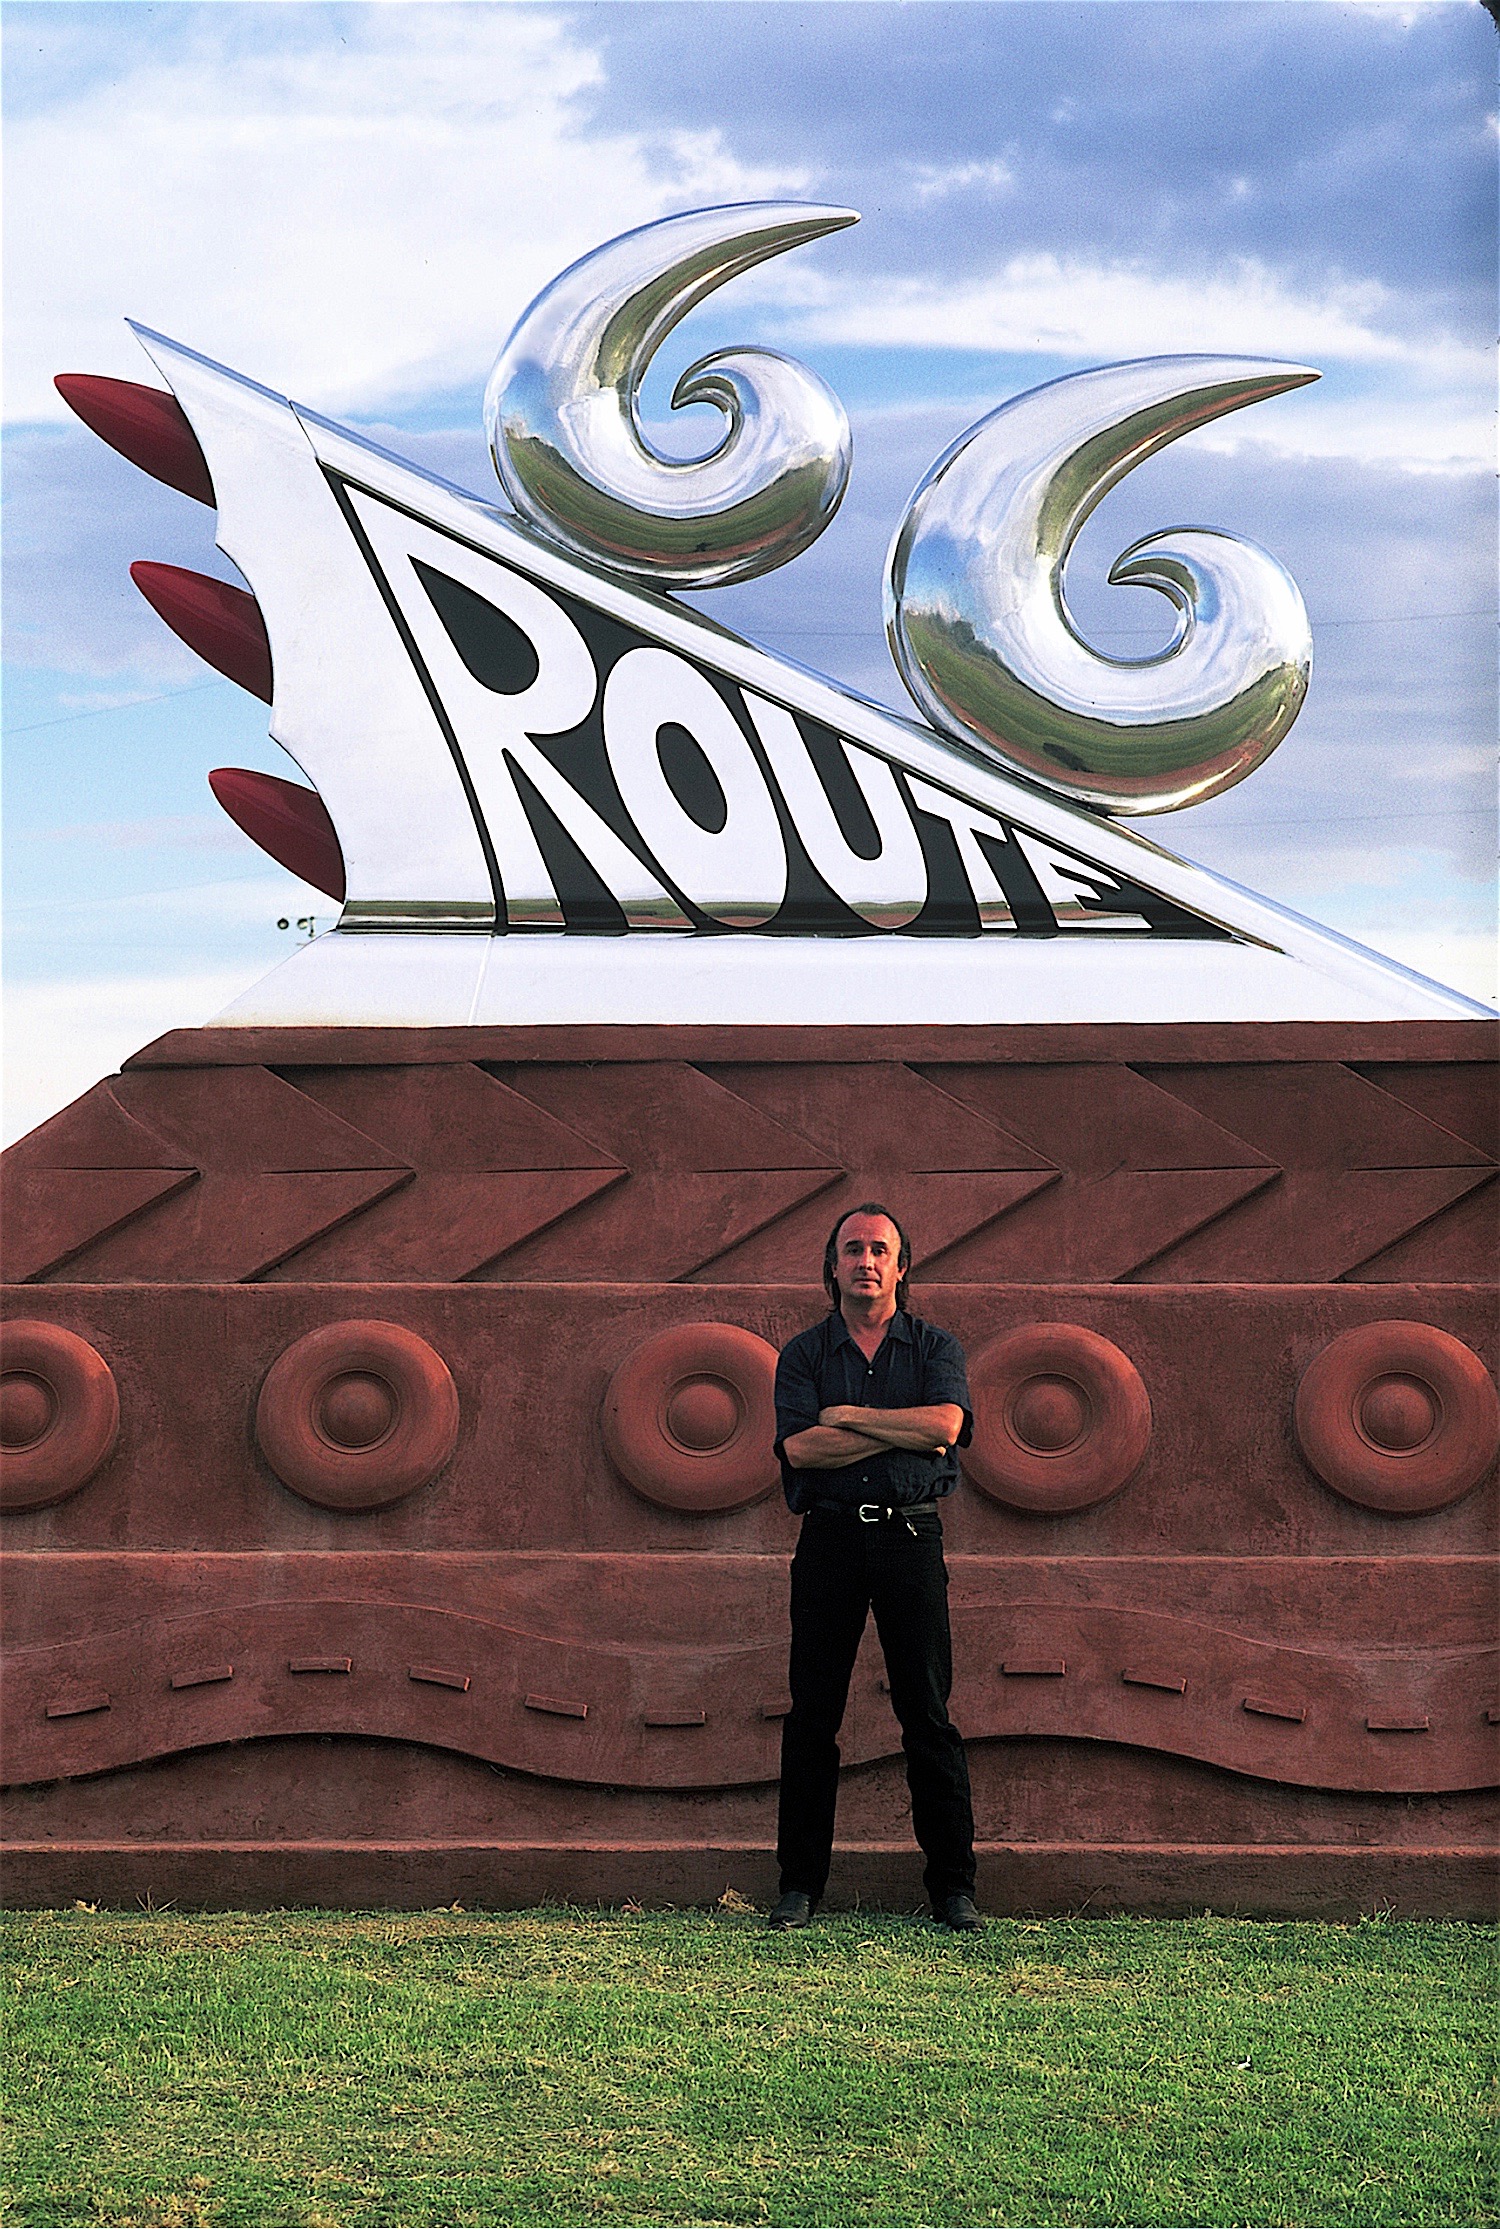 Thomas Coffin - Artist Thomas Coffin and his Route 66 Monument - "Roadside Attraction", commissioned by New Mexico Arts Commission and New Mexico Highway Department - Tucumcari, New Mexico, 1997